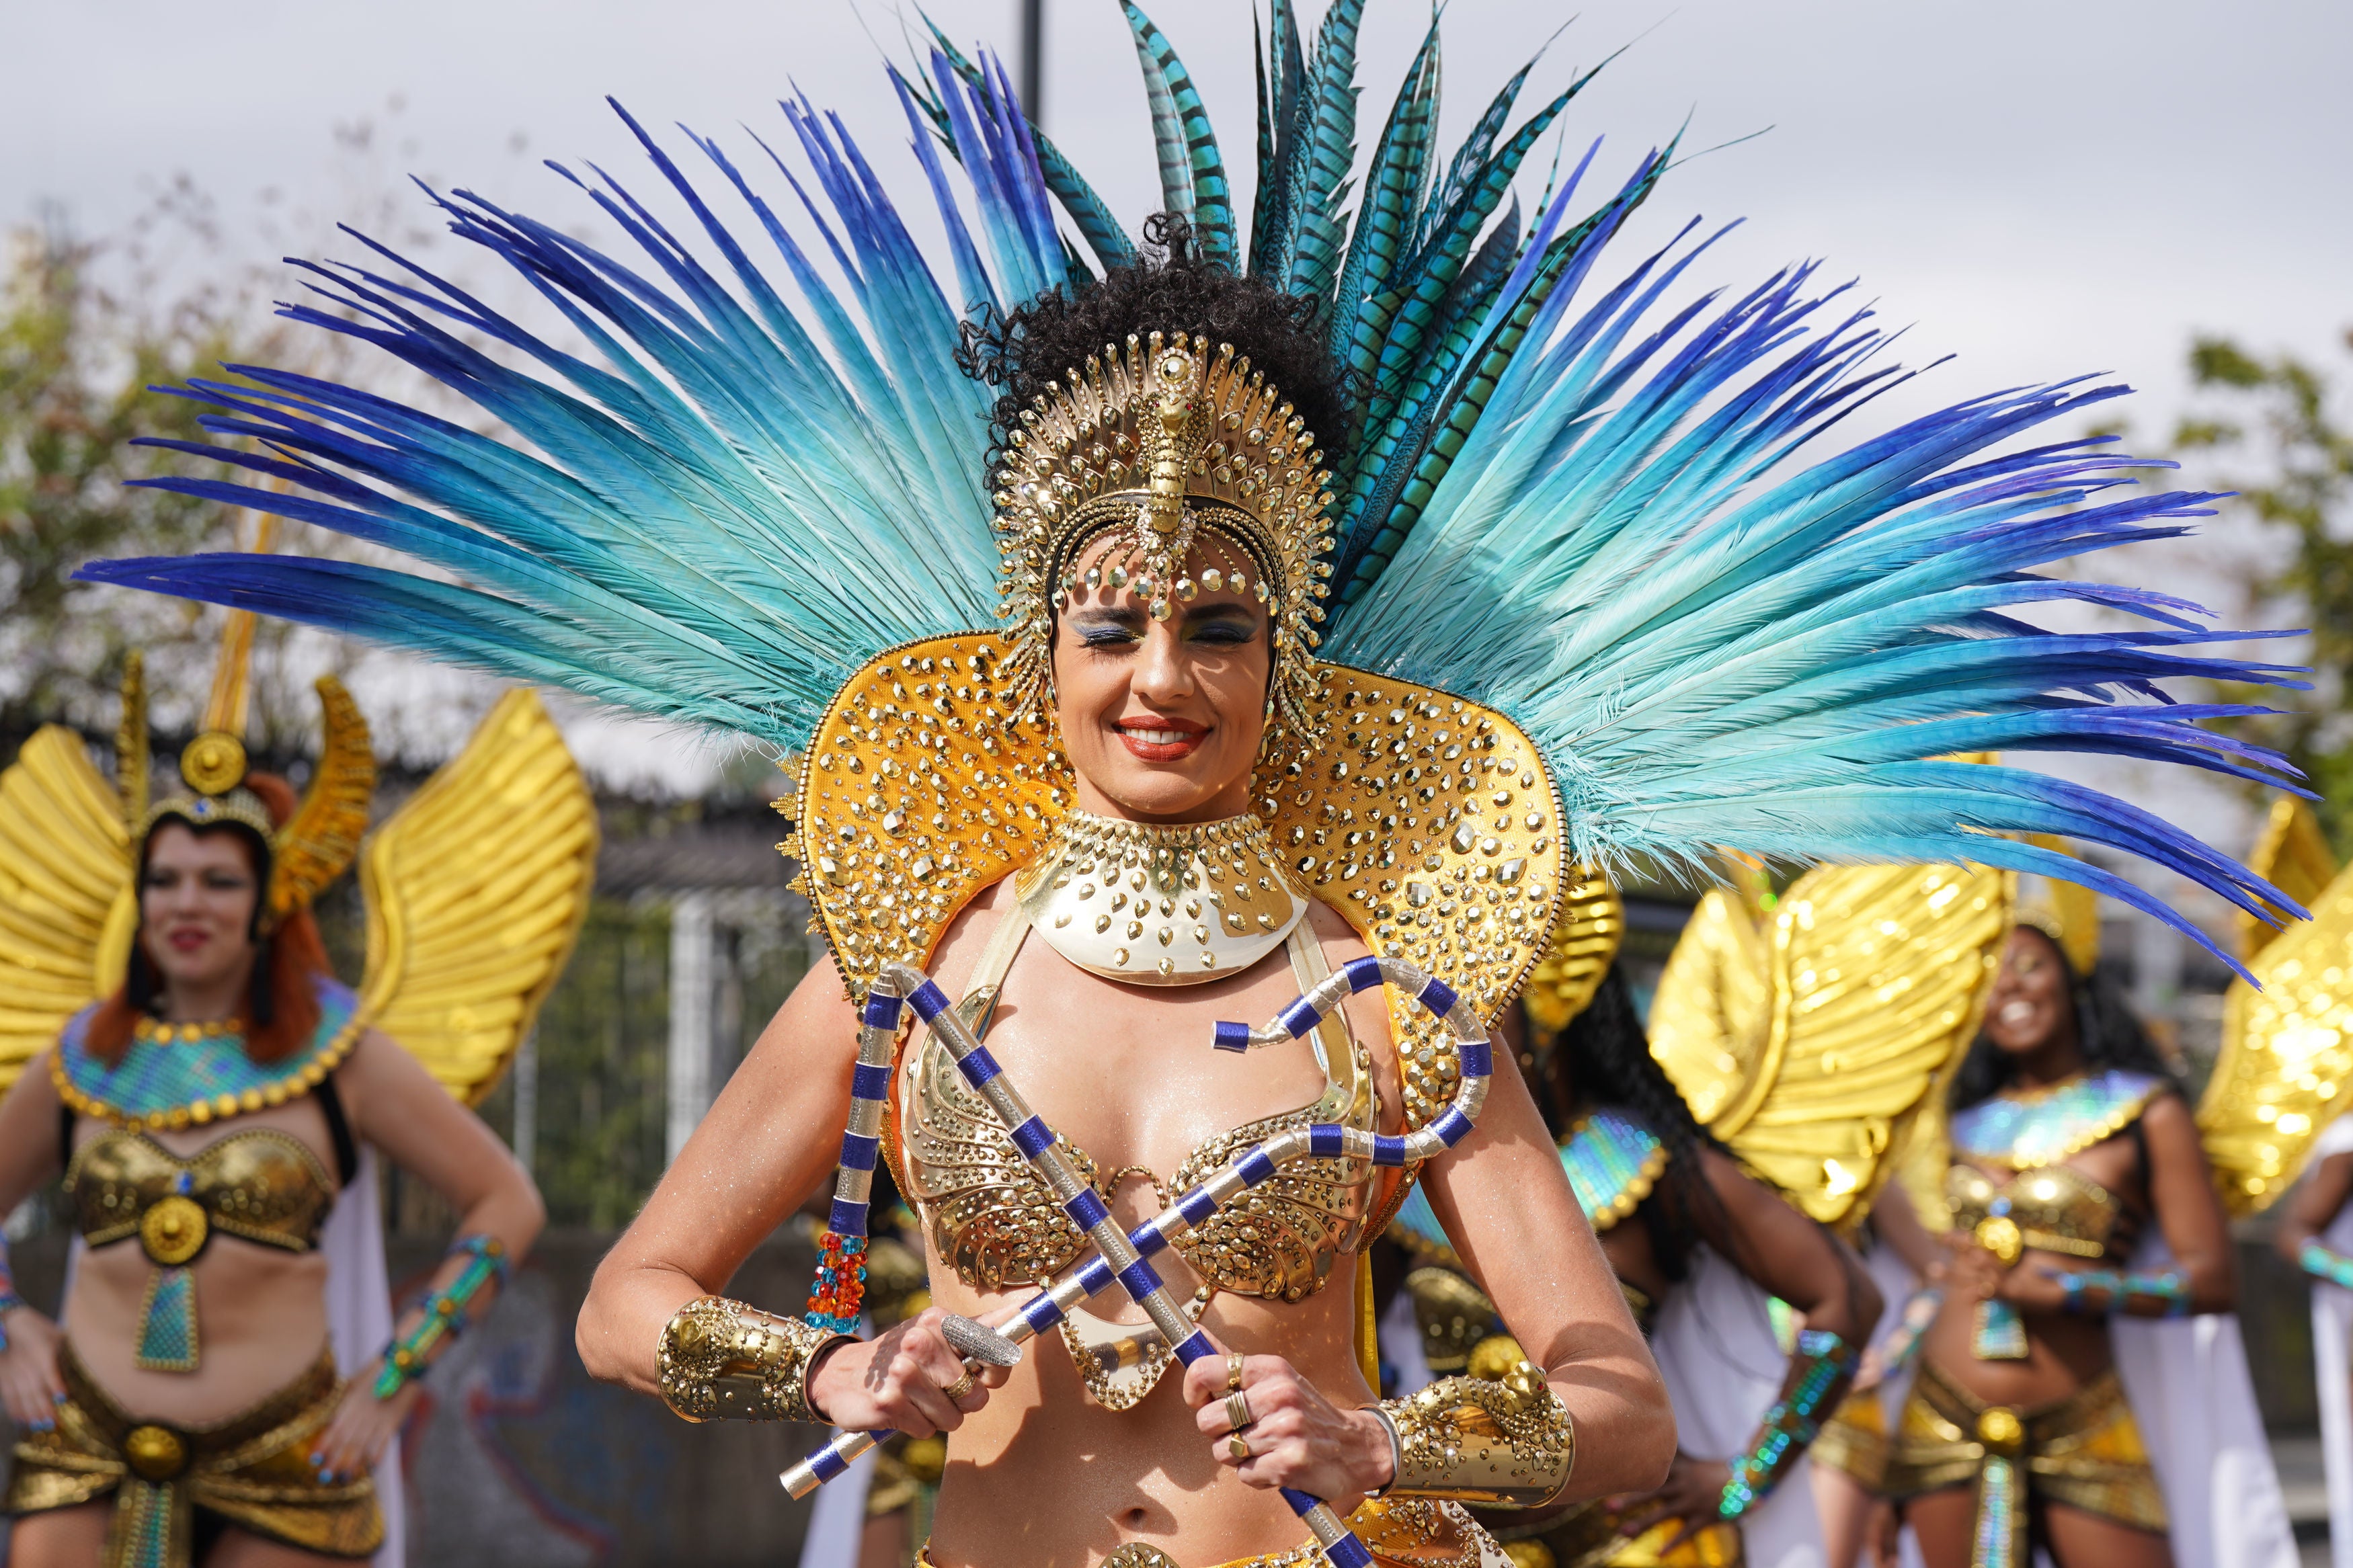 Performers taking part in the Adults Day parade, part of the Notting Hill Carnival in west London over the summer bank holiday weekend